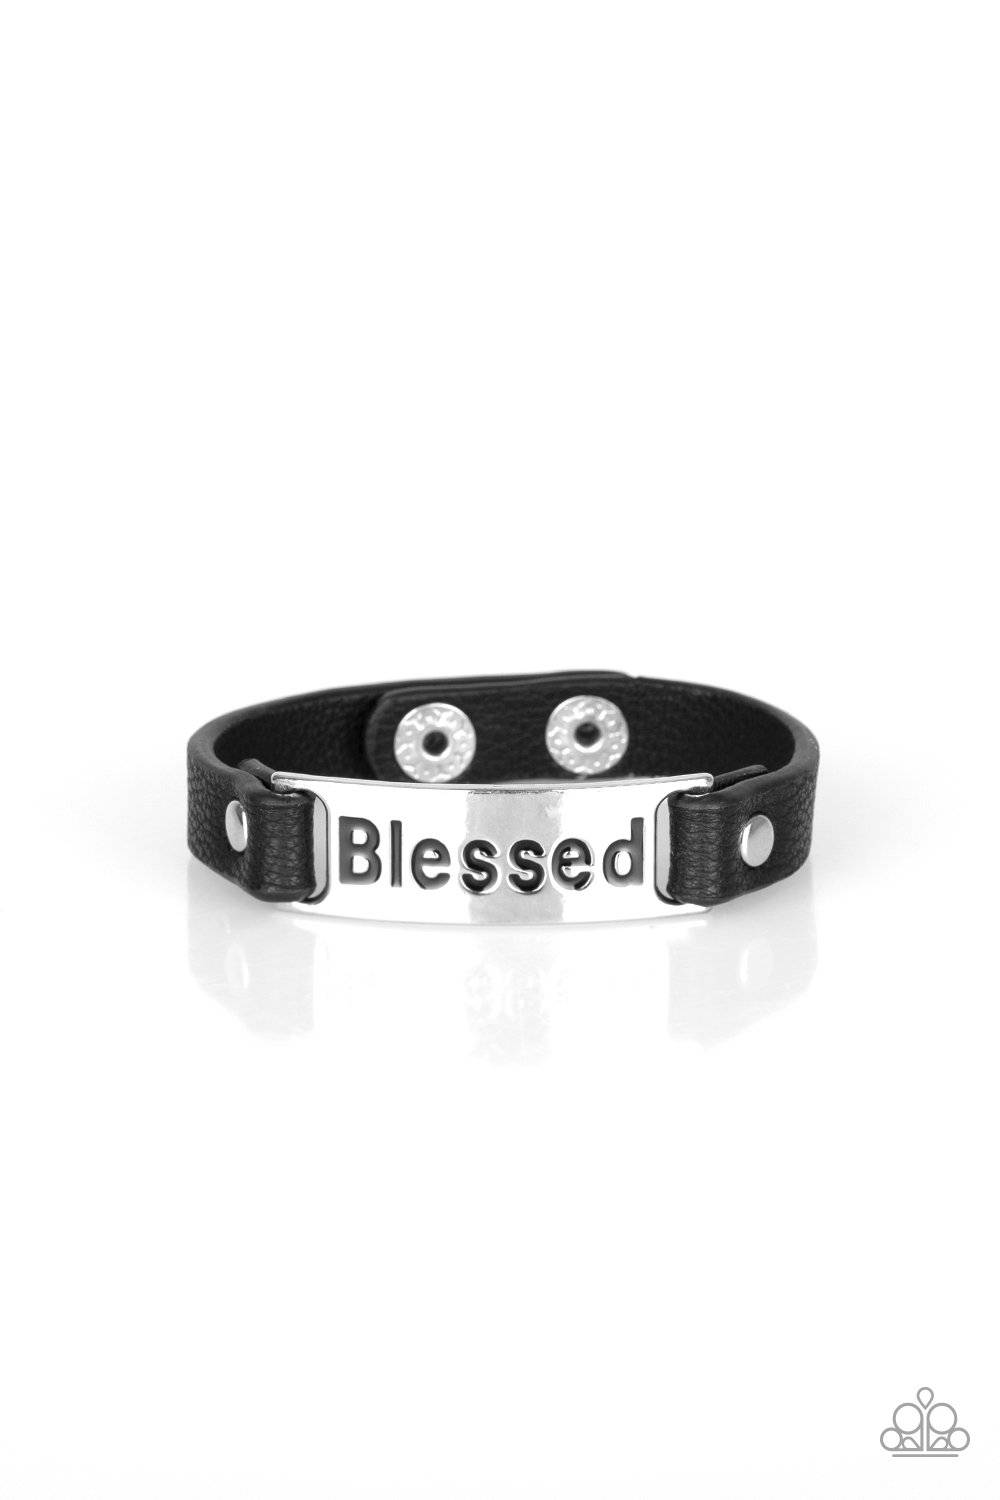 Count Your Blessings - Black Blessed Bracelet - Paparazzi Accessories - GlaMarous Titi Jewels